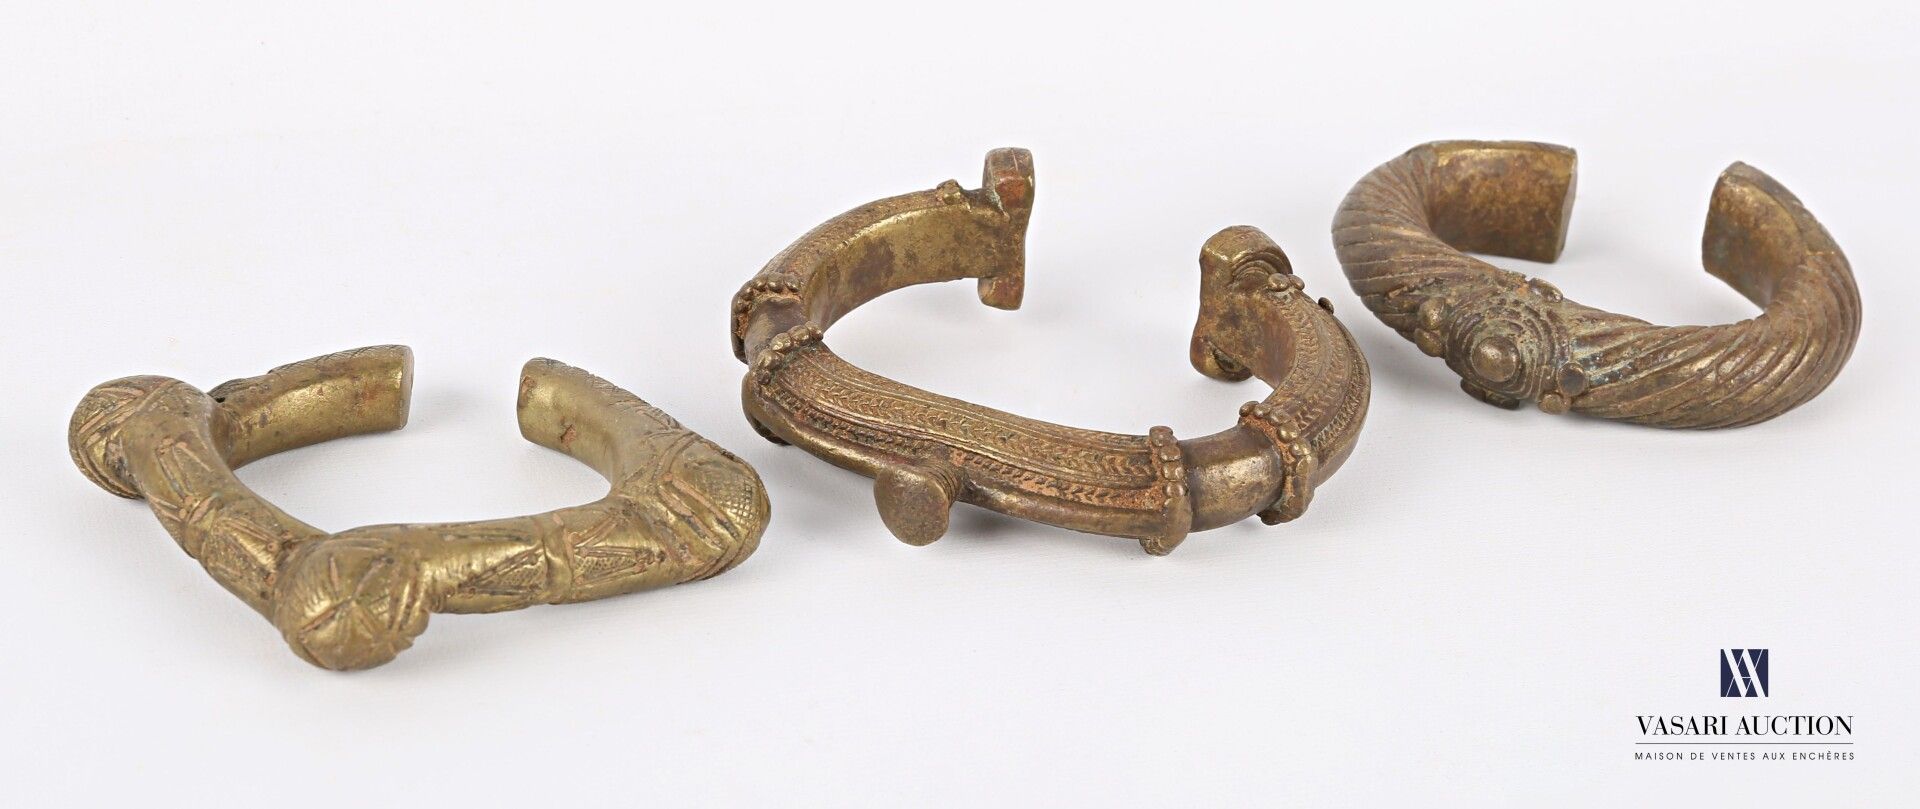 Null AFRICA

Set of three bronze bracelets or shackles decorated with twisted st&hellip;